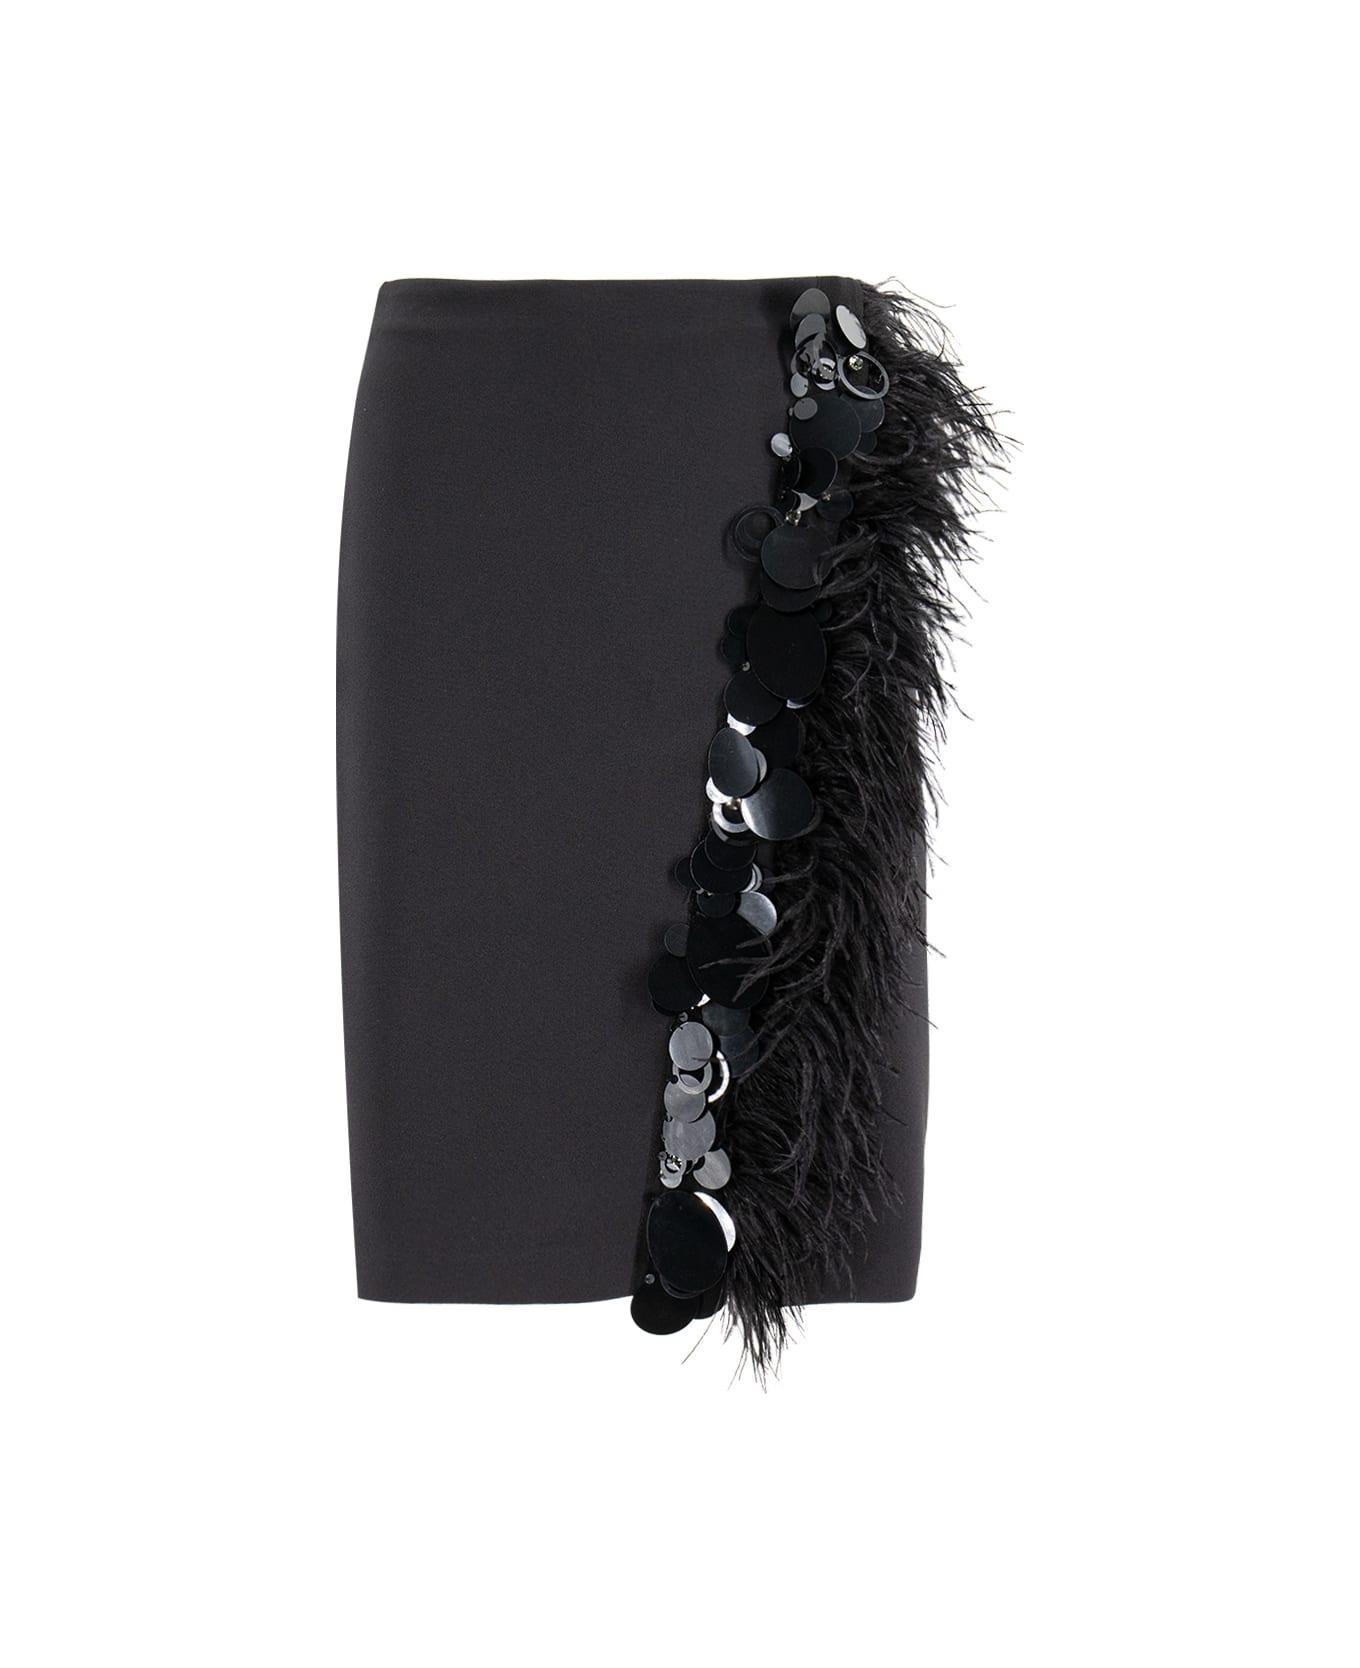 Pinko Skirt With Feathers And Sequins - NERO LIMOUSINE スカート